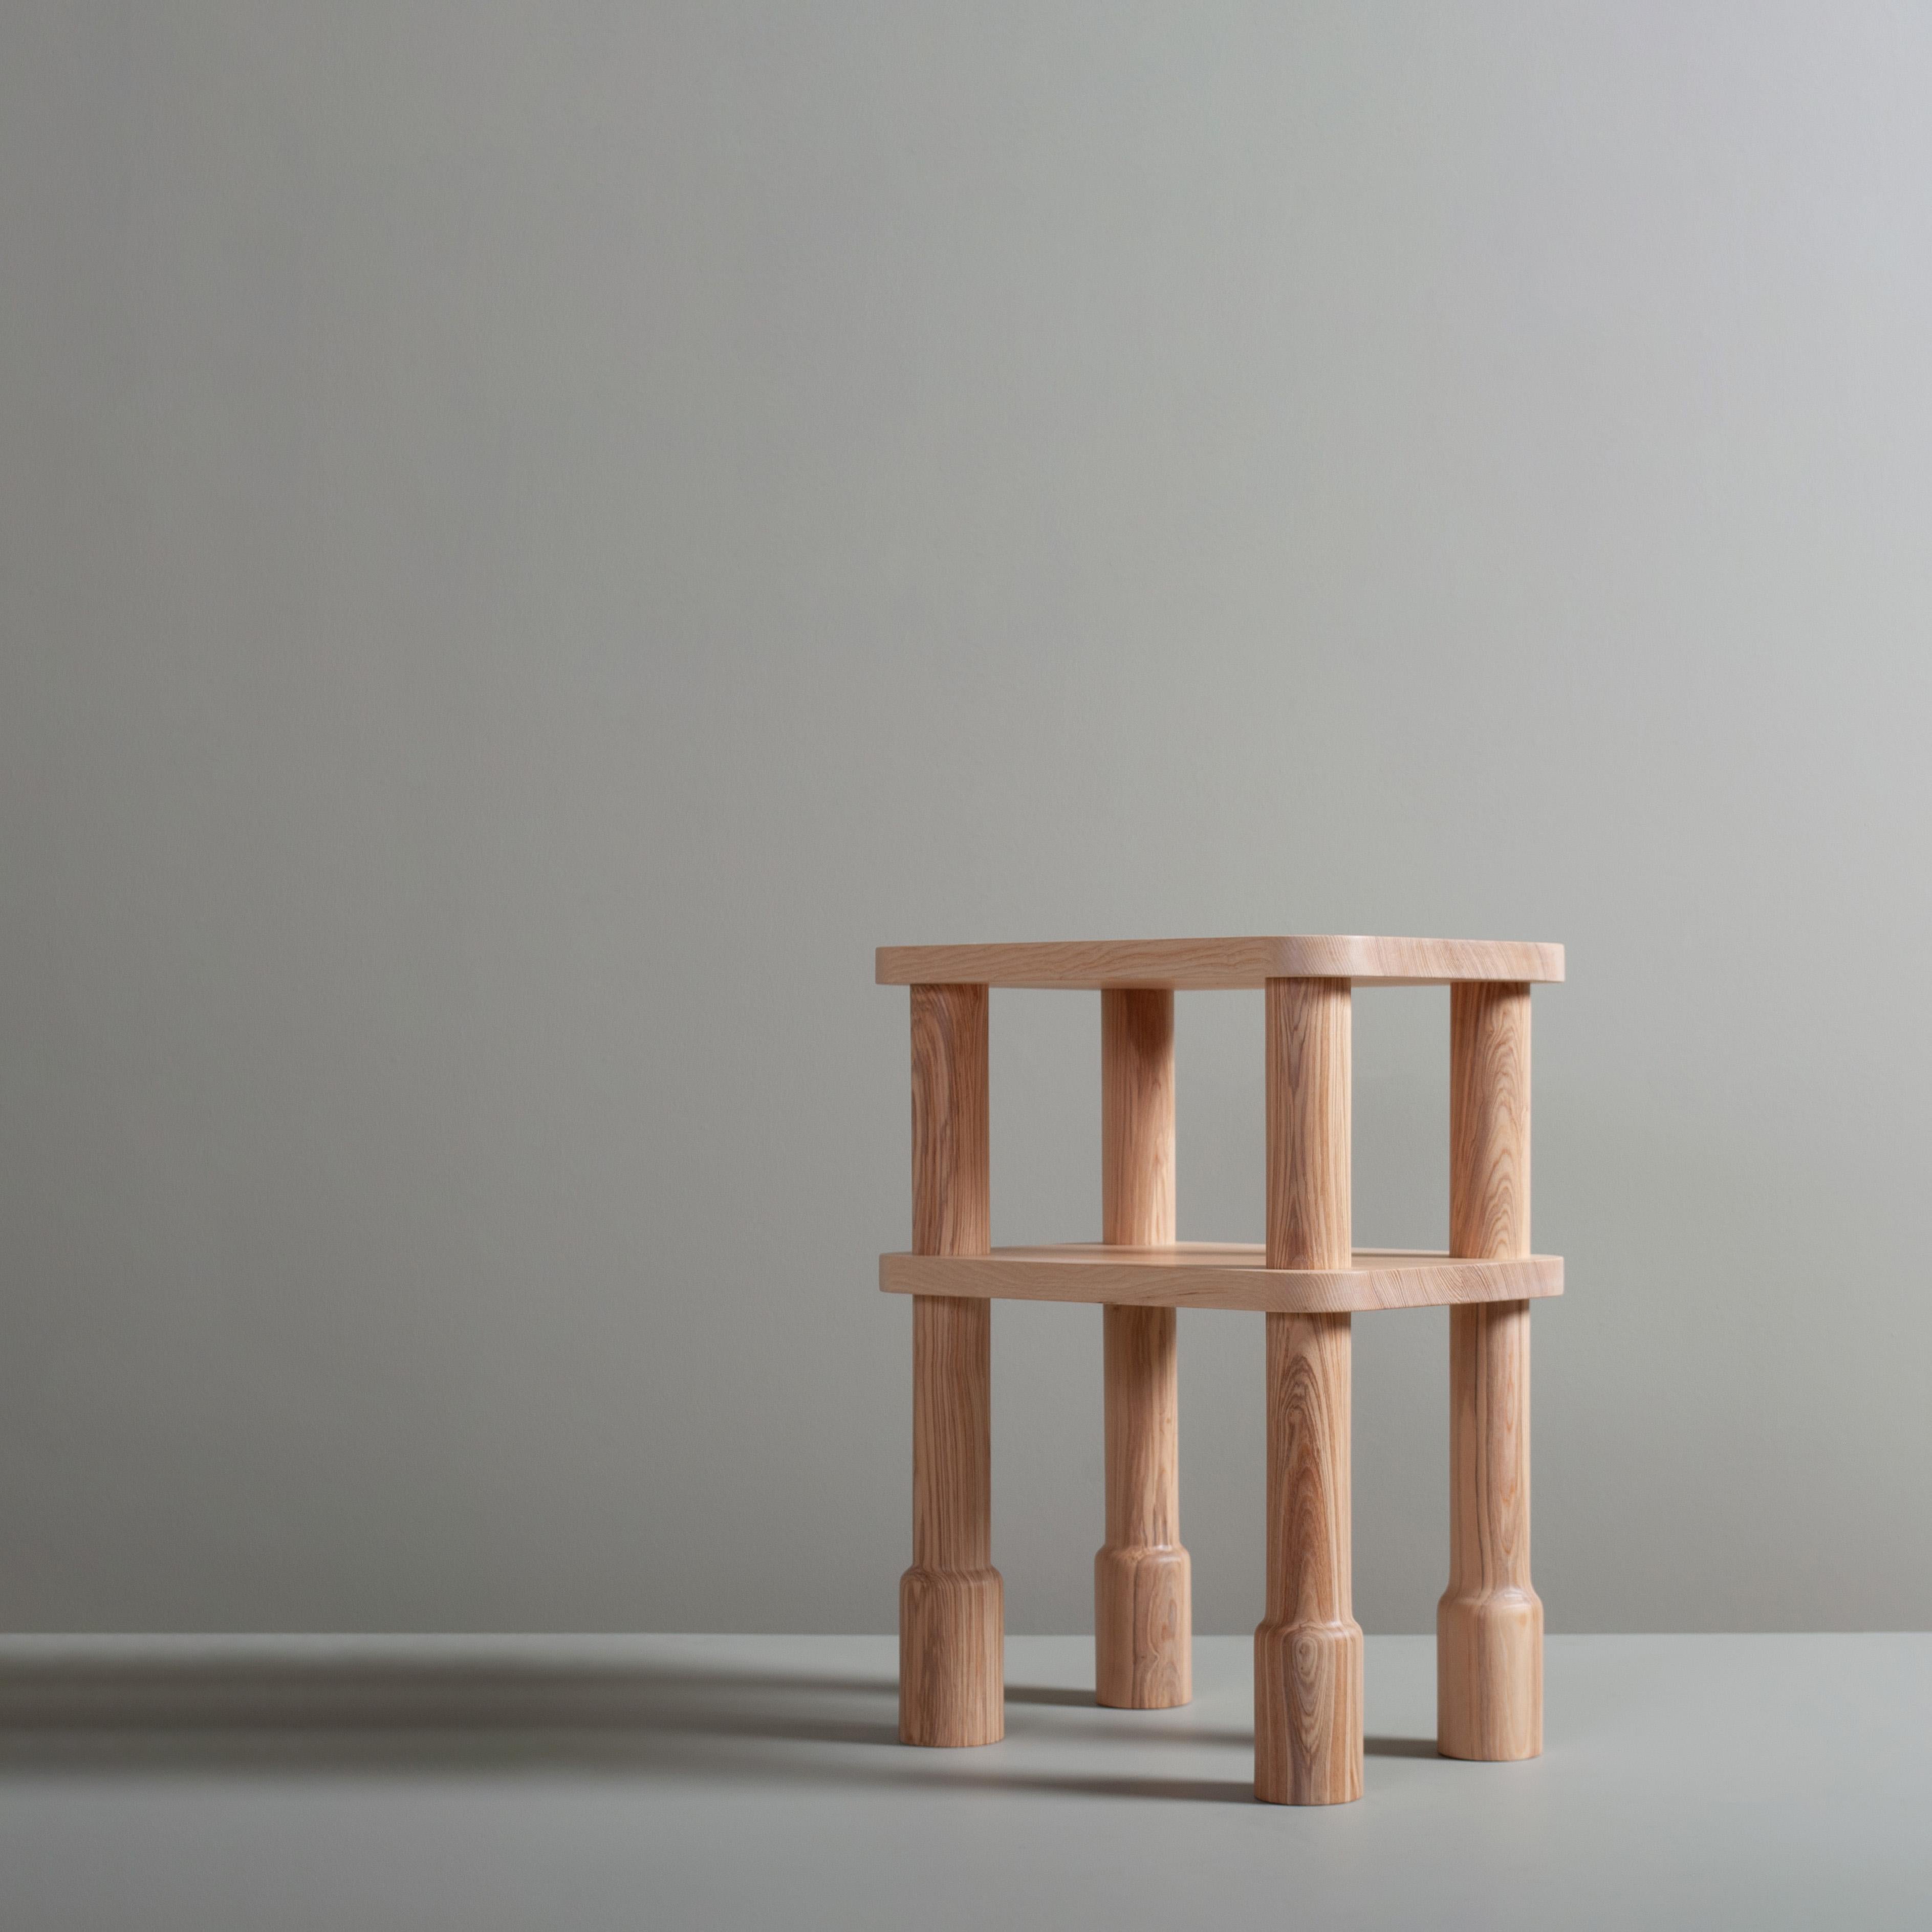 A hand-crafted and turned English ash end table. 
These are robust bespoke pieces of fine quality, handmade by our master craftsman in solid English ash. Finished in durable Osmo oil. 
Inspired by Maunsell forts and old cannon ramrods. These pieces